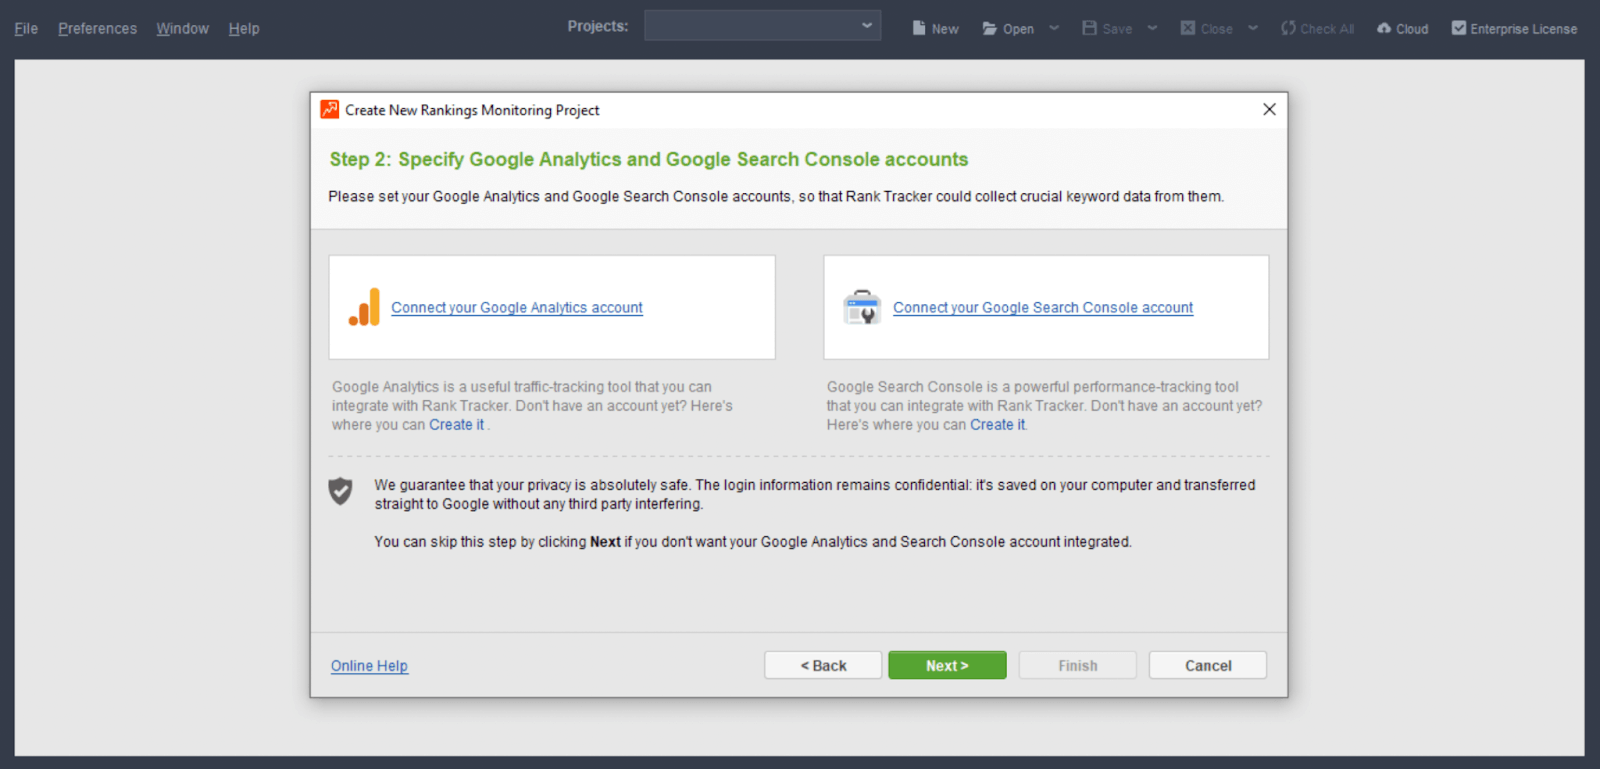 3. connect Google search console and Google analytics